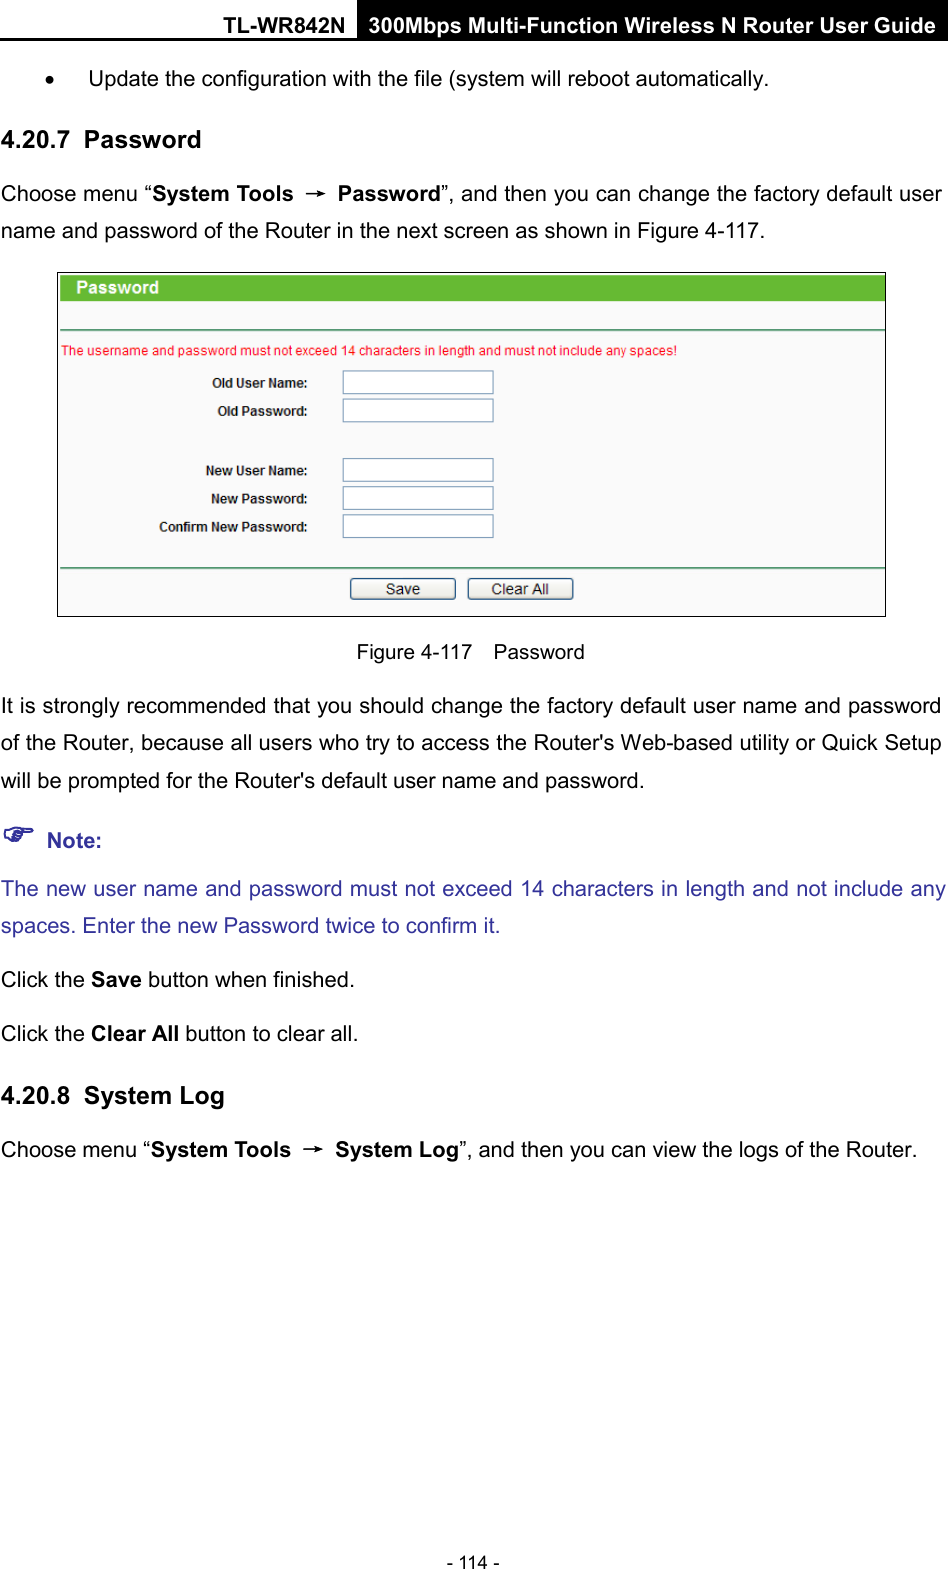 TL-WR842N 300Mbps Multi-Function Wireless N Router User Guide  - 114 - •  Update the configuration with the file (system will reboot automatically. 4.20.7 Password Choose menu “System Tools → Password”, and then you can change the factory default user name and password of the Router in the next screen as shown in Figure 4-117.  Figure 4-117  Password It is strongly recommended that you should change the factory default user name and password of the Router, because all users who try to access the Router&apos;s Web-based utility or Quick Setup will be prompted for the Router&apos;s default user name and password.  Note: The new user name and password must not exceed 14 characters in length and not include any spaces. Enter the new Password twice to confirm it. Click the Save button when finished. Click the Clear All button to clear all. 4.20.8 System Log Choose menu “System Tools → System Log”, and then you can view the logs of the Router. 